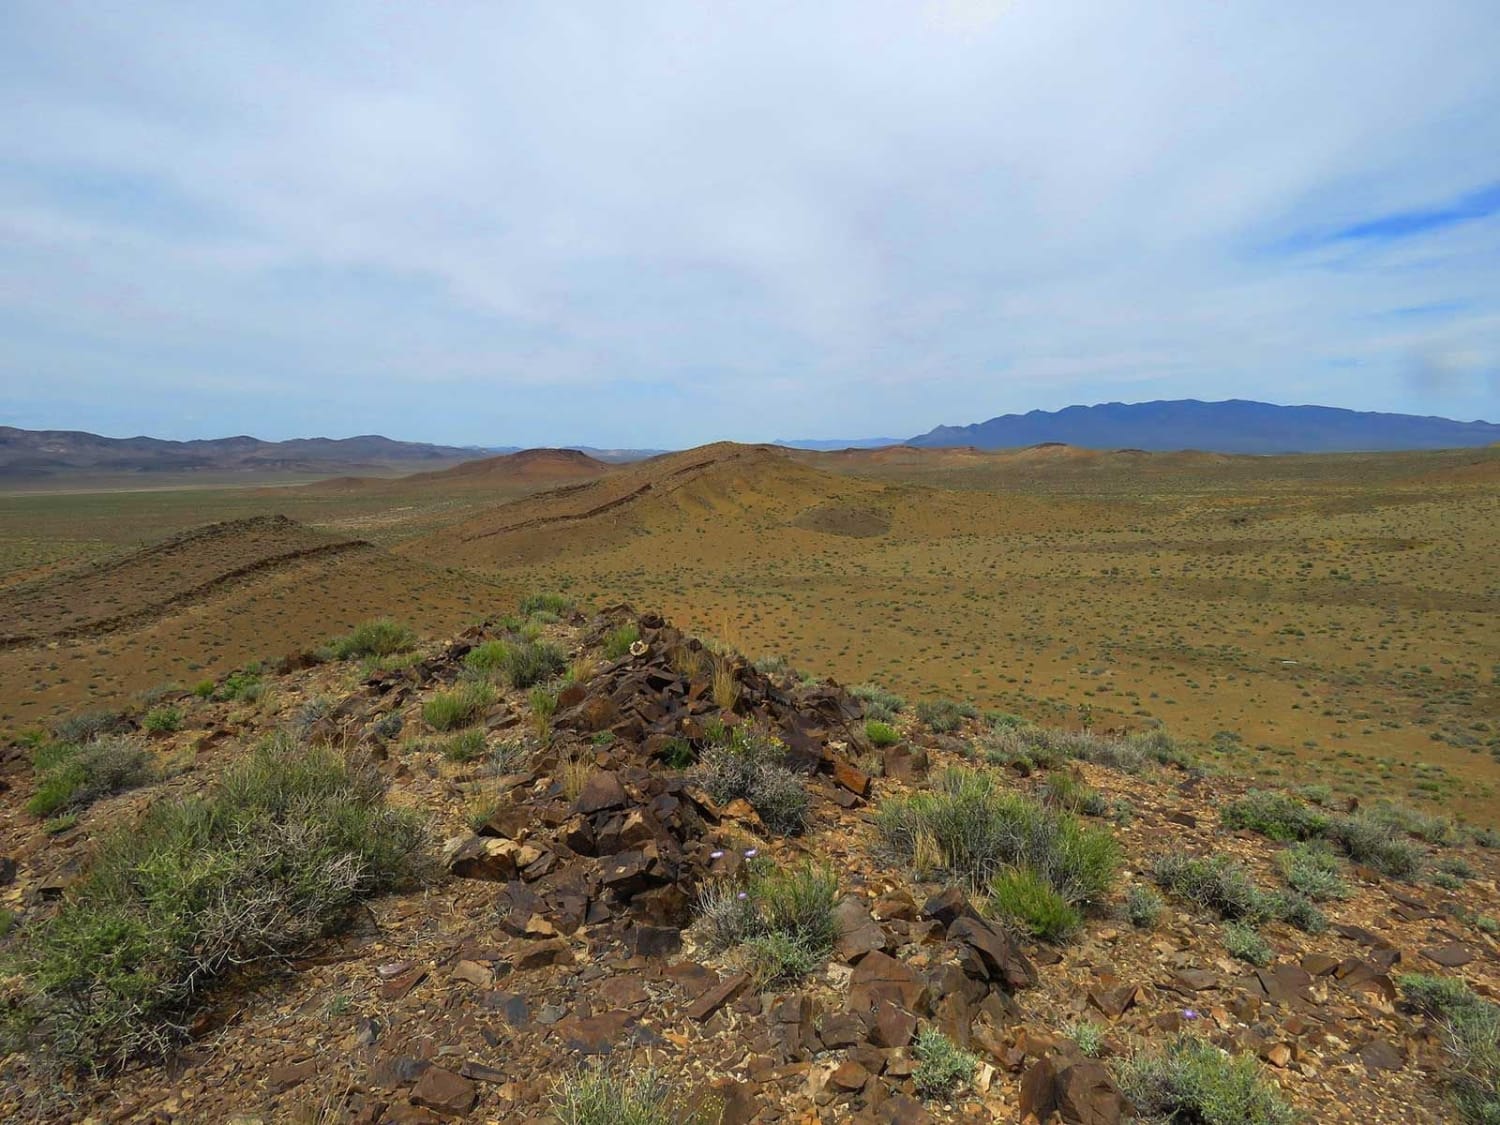 Fossils From One of the World’s First Reefs Can Be Found on Mountains in Nevada. Archaeocyaths were the original reef builders, and one of the best places to see them is in the desert